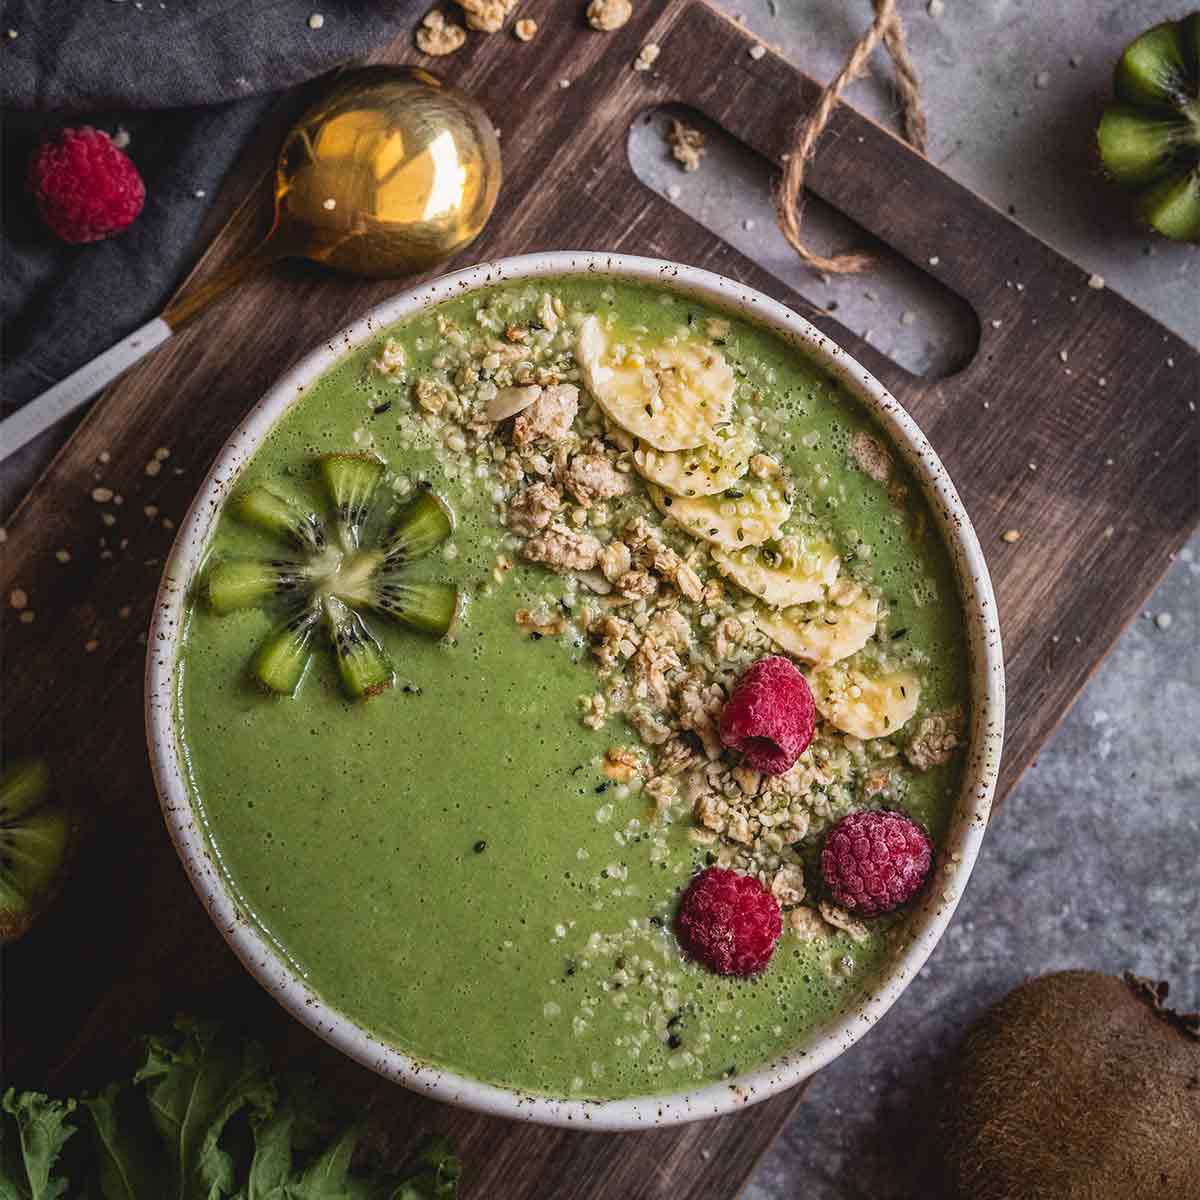 Featured image of green smoothie bowl